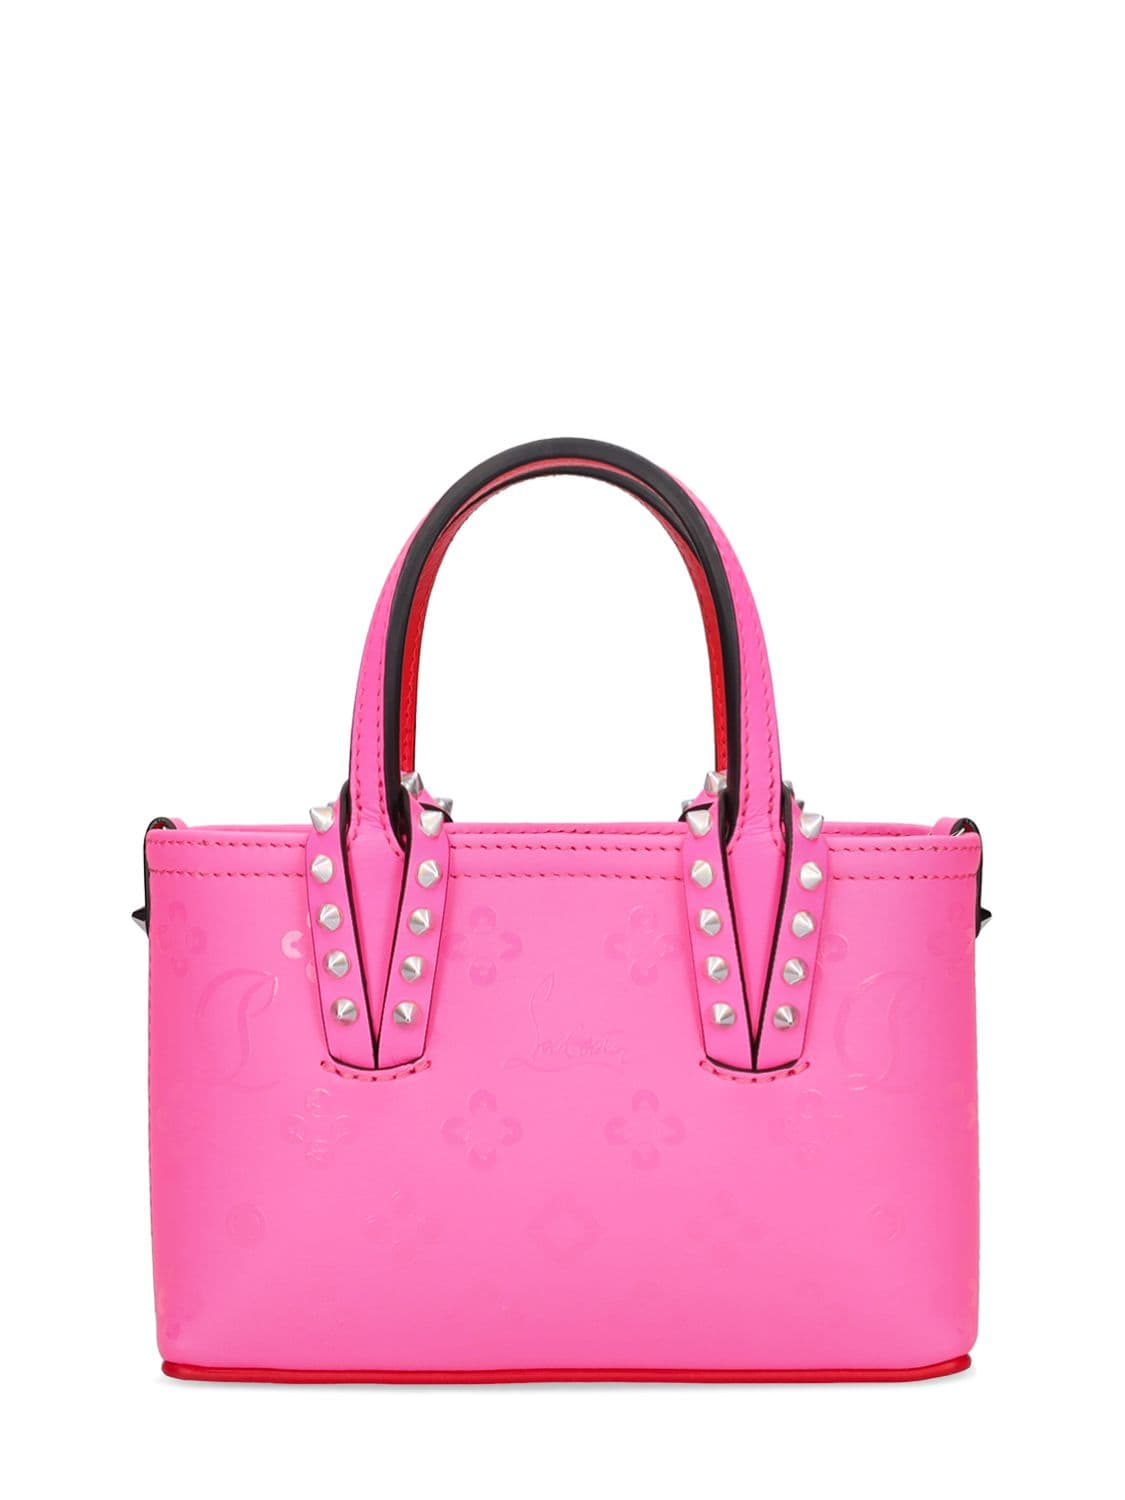 The neon bag, the spiky brogues, I want it all! ;)